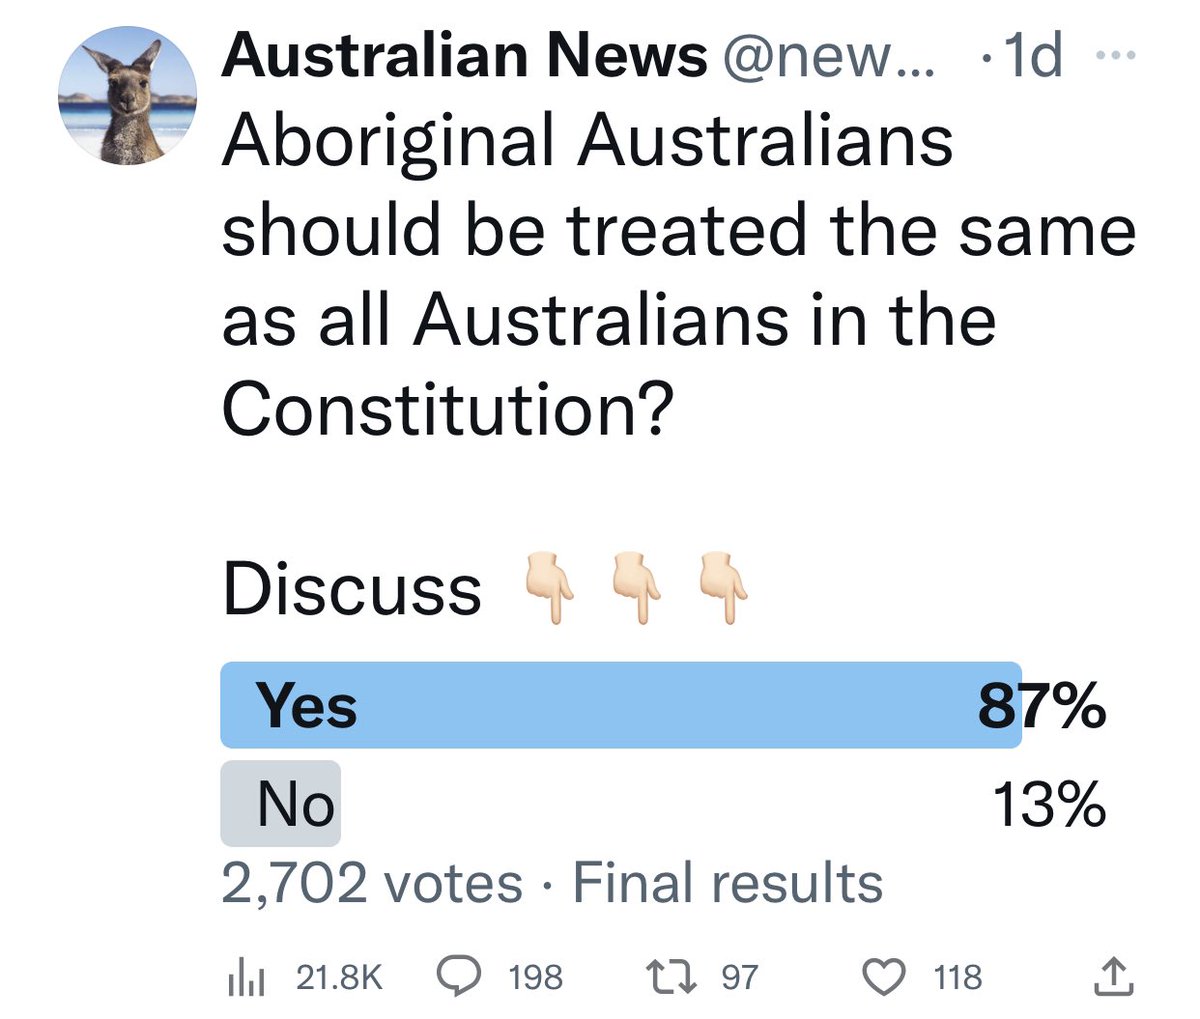 BREAKING: The Australian people have spoken! An overwhelming 87% said YES “Aboriginal Australians should be treated the same as all Australians in the Constitution.” Only 13% said NO to Aboriginal Australians being treated the same as all Australians in Constitution! #auspol